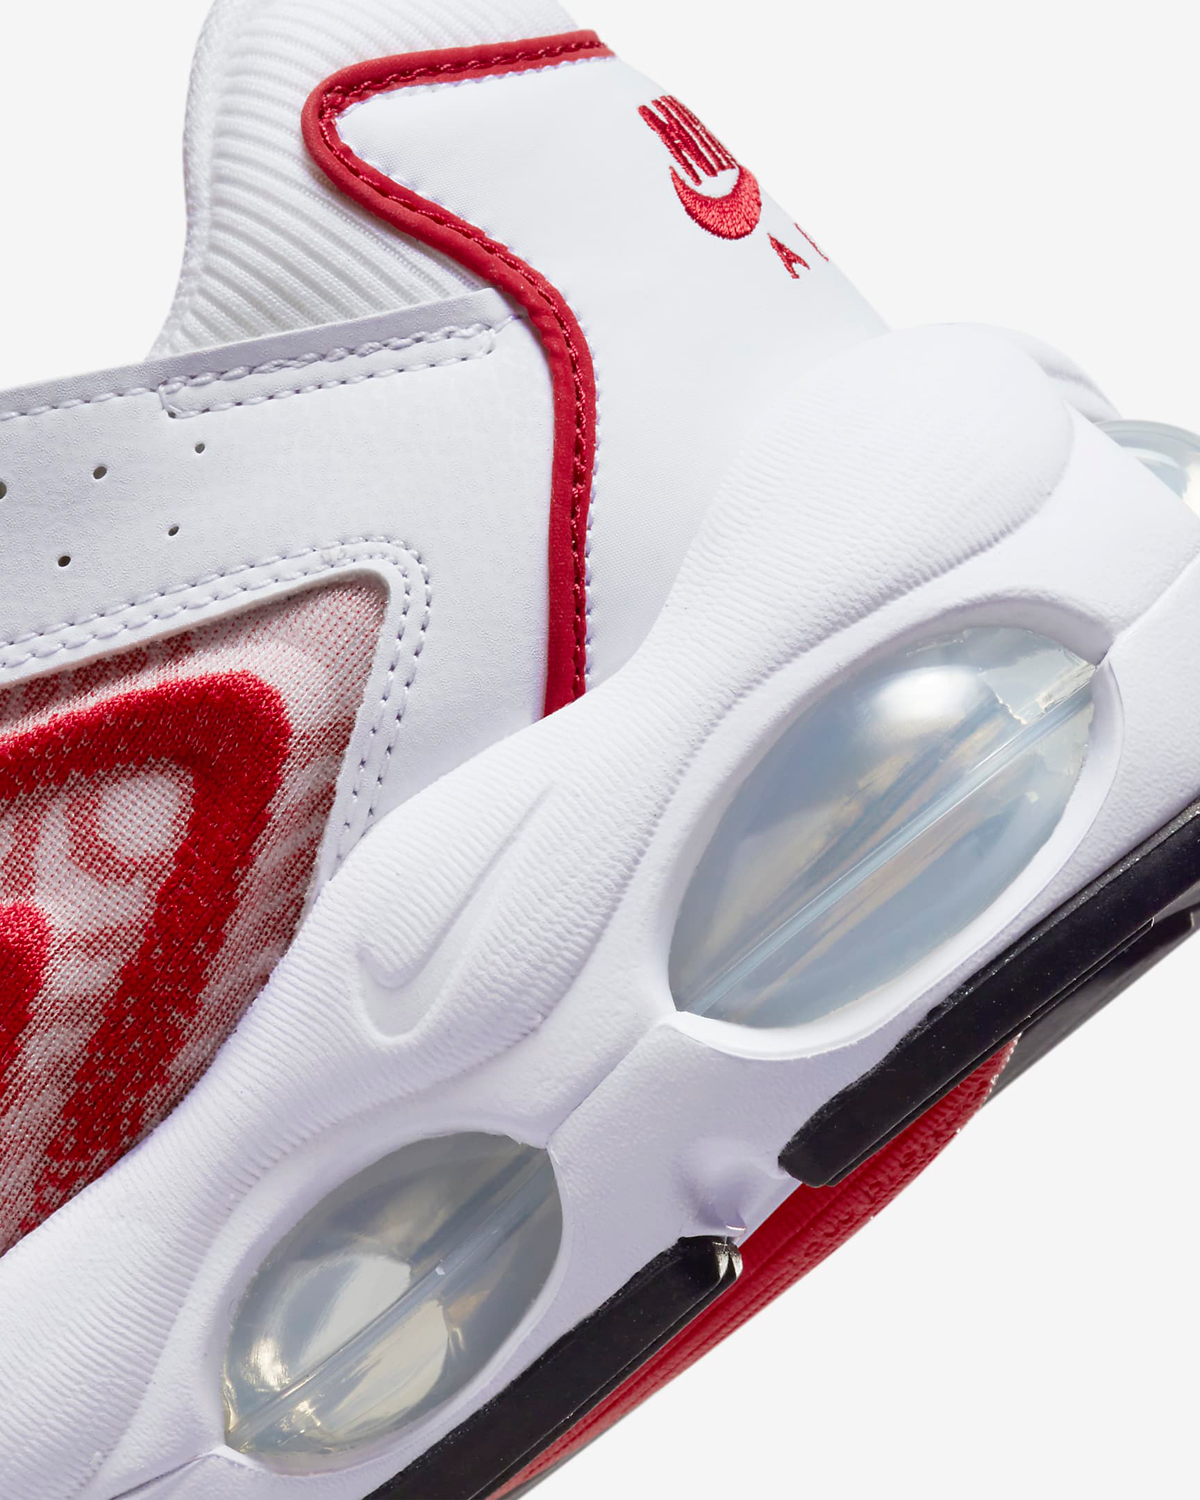 Nike-Air-Max-TW-White-University-Red-Release-Date-8